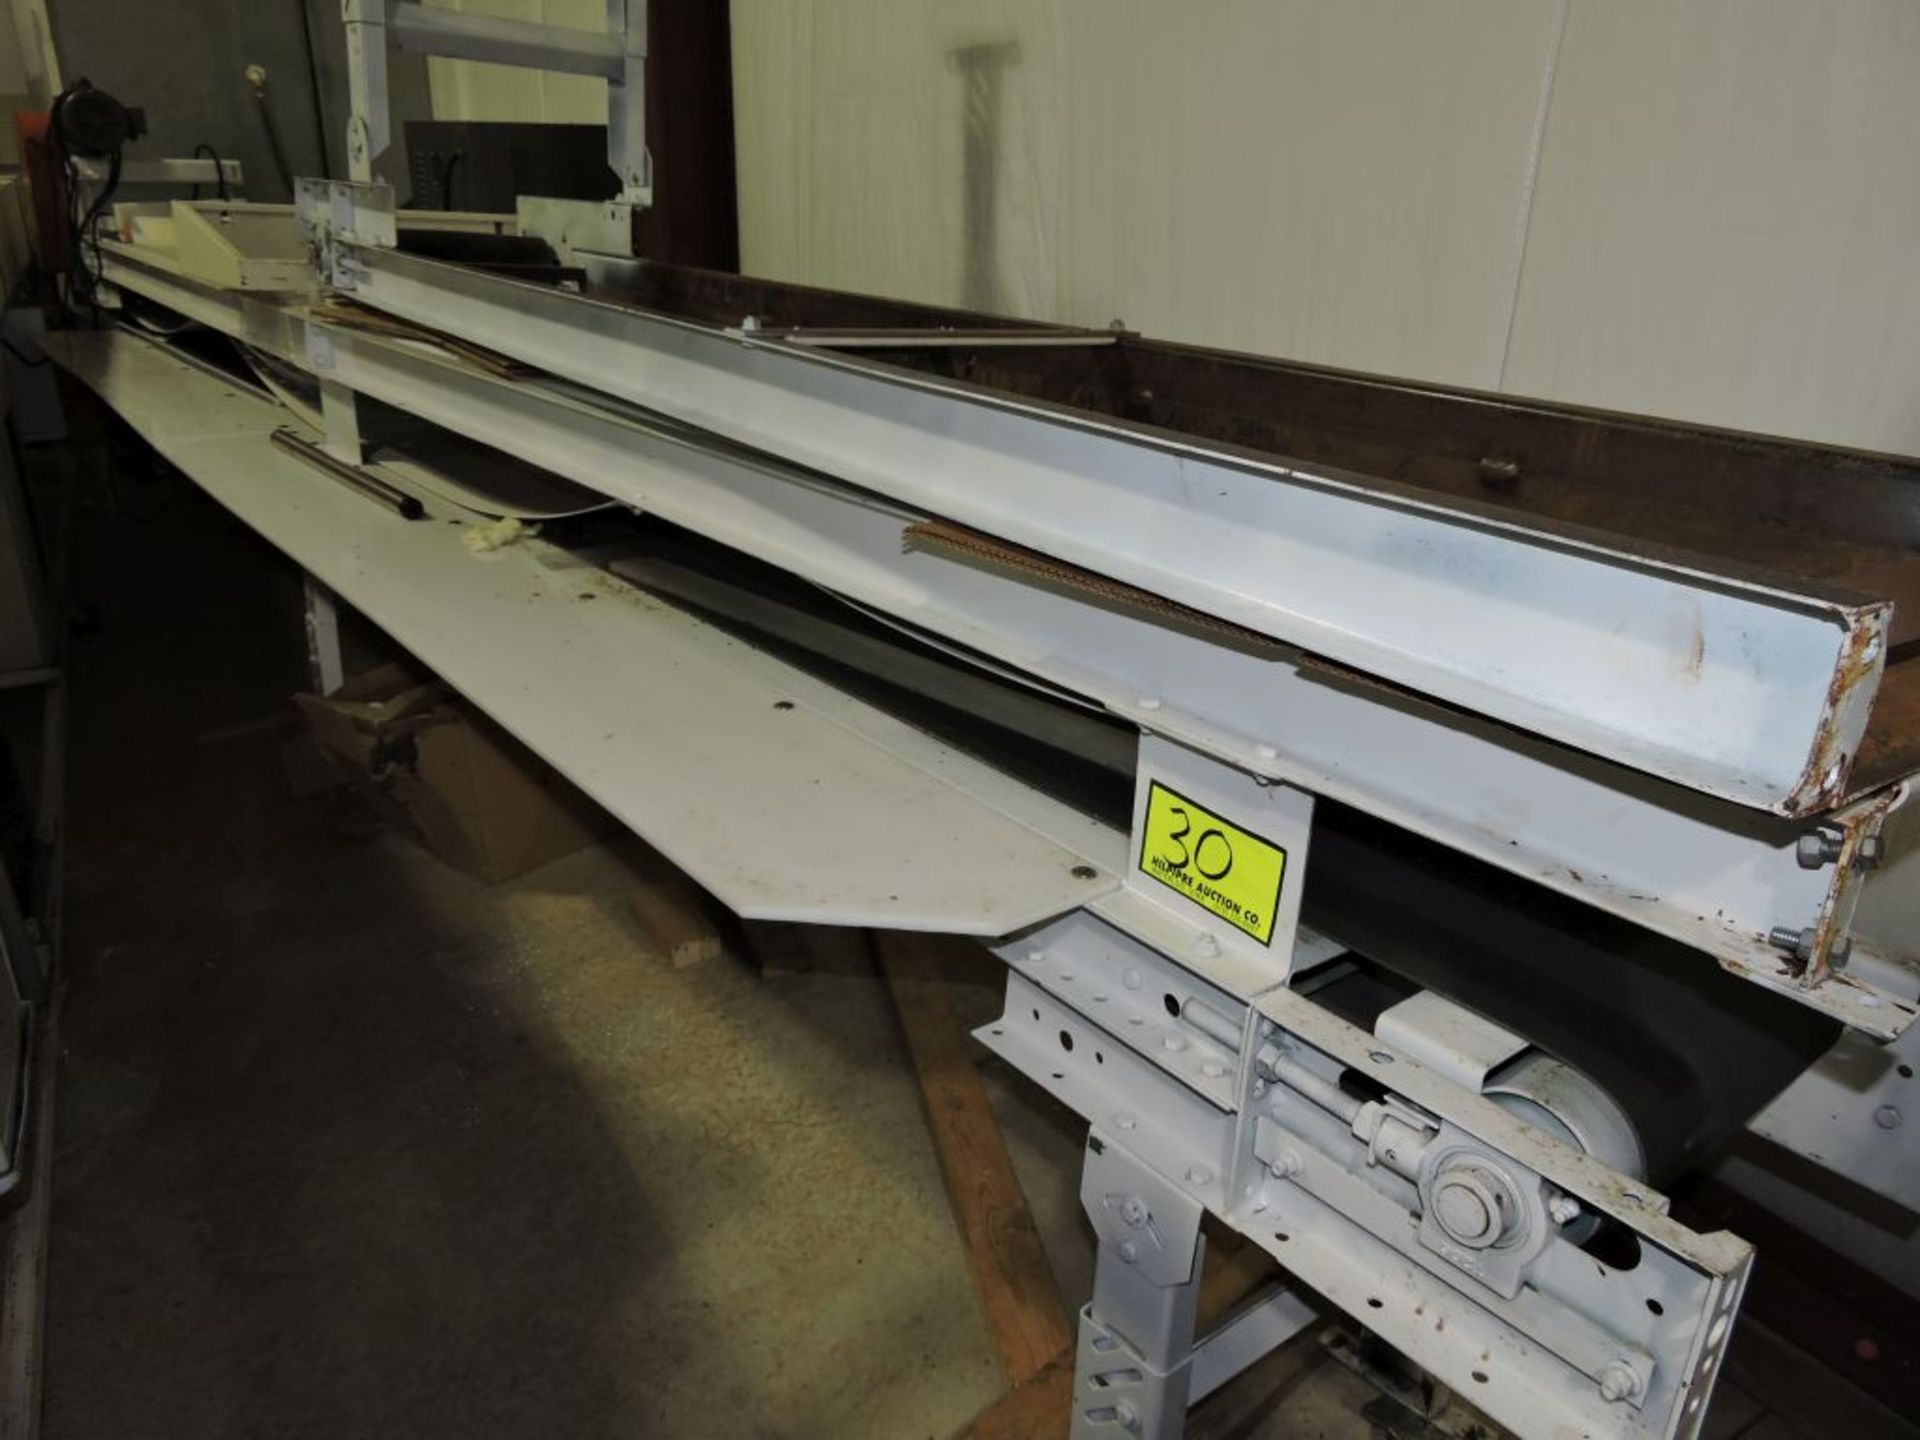 Rouch dual layer packaging conveyor, s/n 384698, top 25" x 12" food grade belt, Bottom 18' x 12" Now